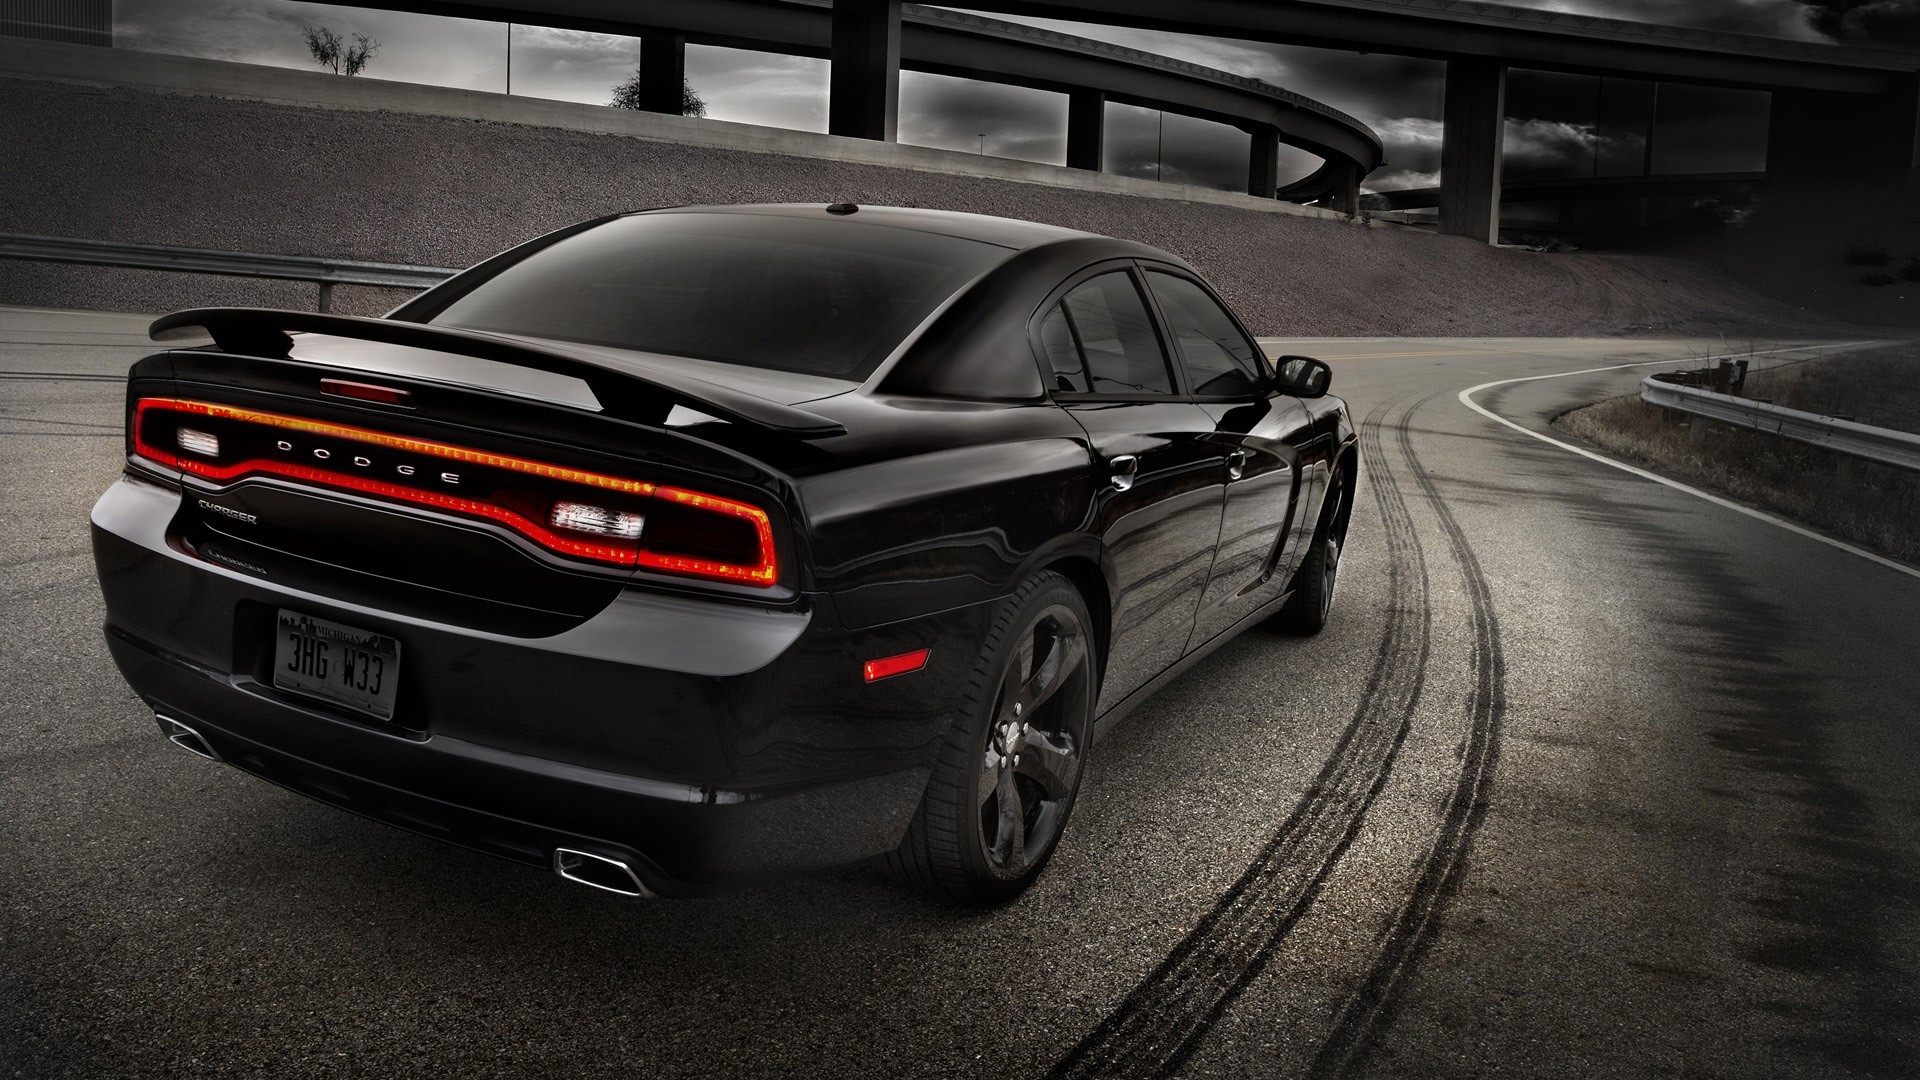 1920x1080 amazing dodge challenger wallpapers wallpaper cave with dodge charger logo  wallpaper